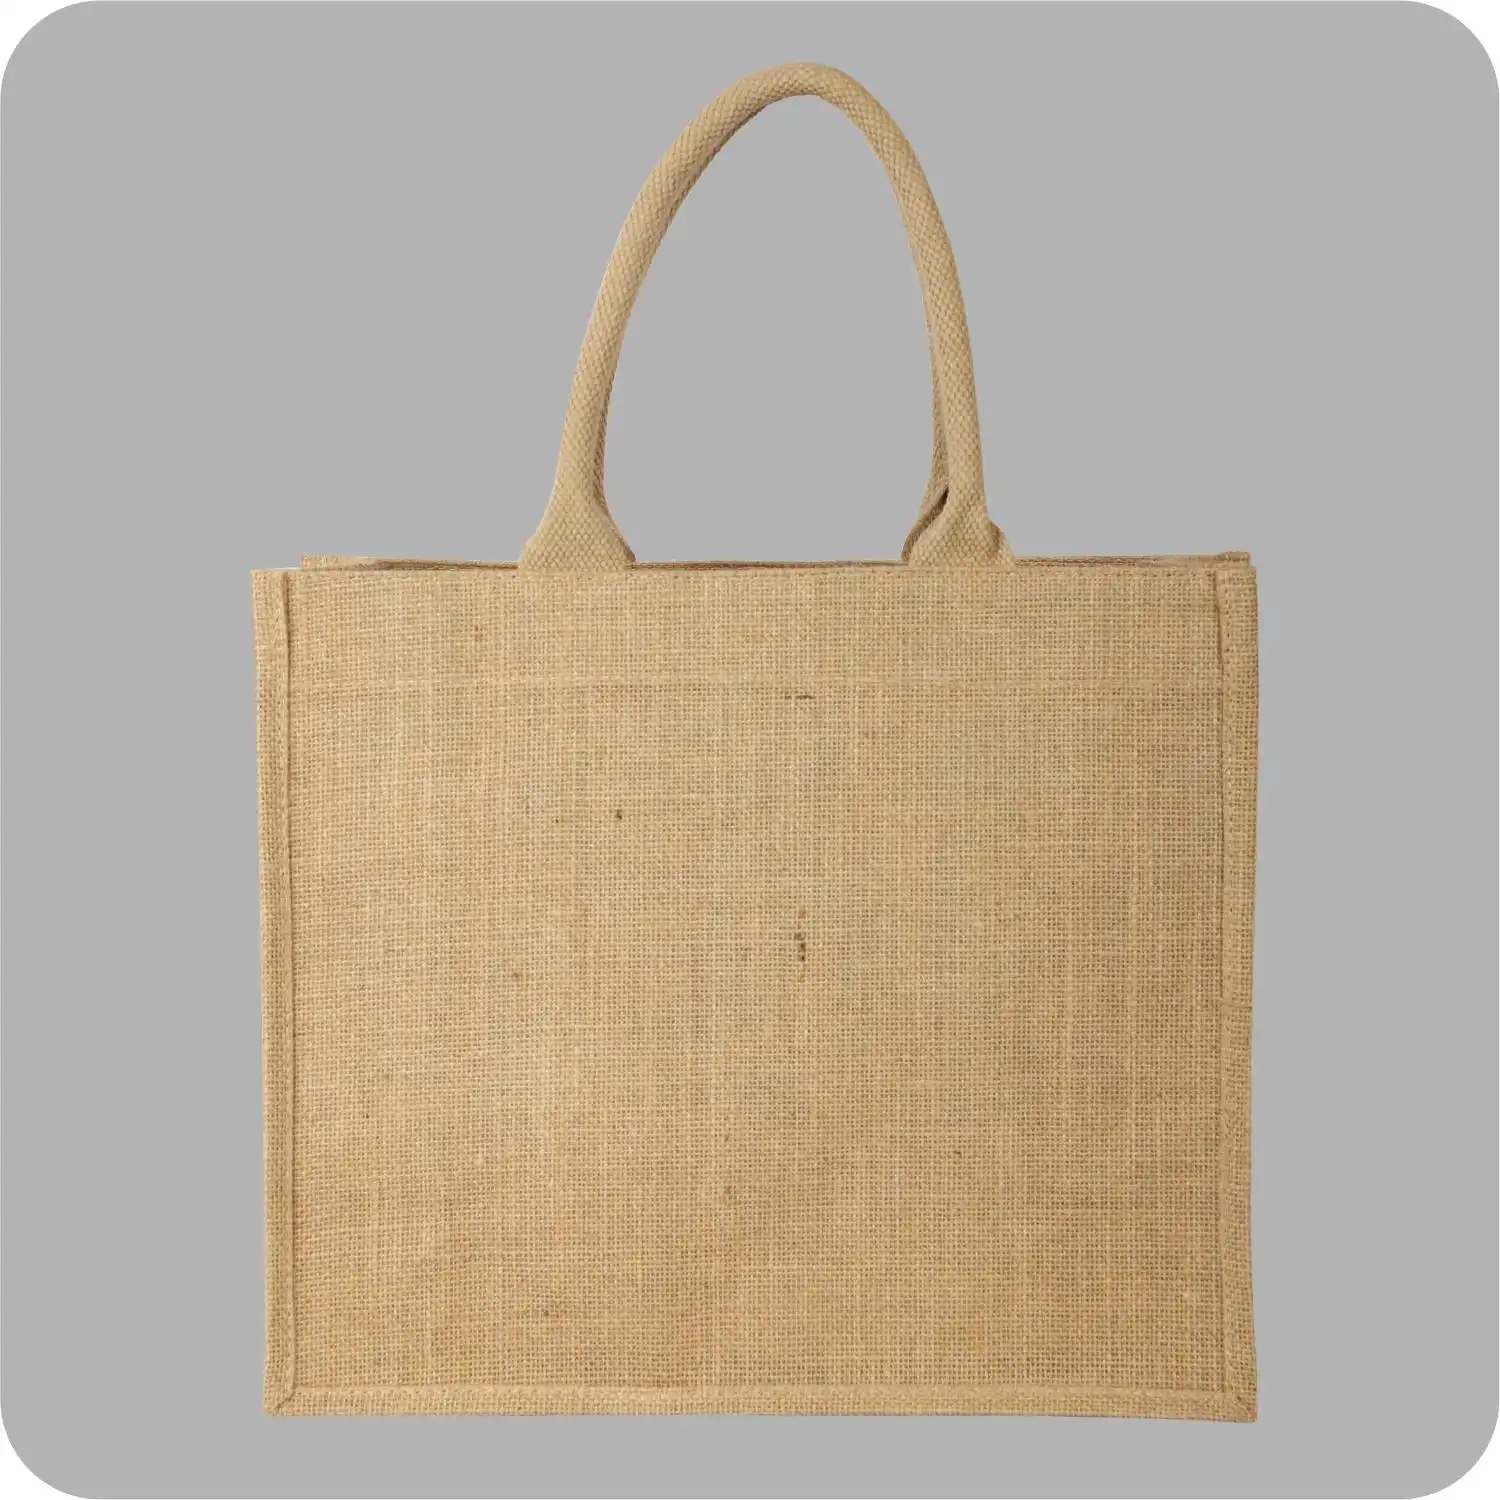 12x10x5 Inches, Fine Quality Cotton Cord Handled, Jute Tote Bags